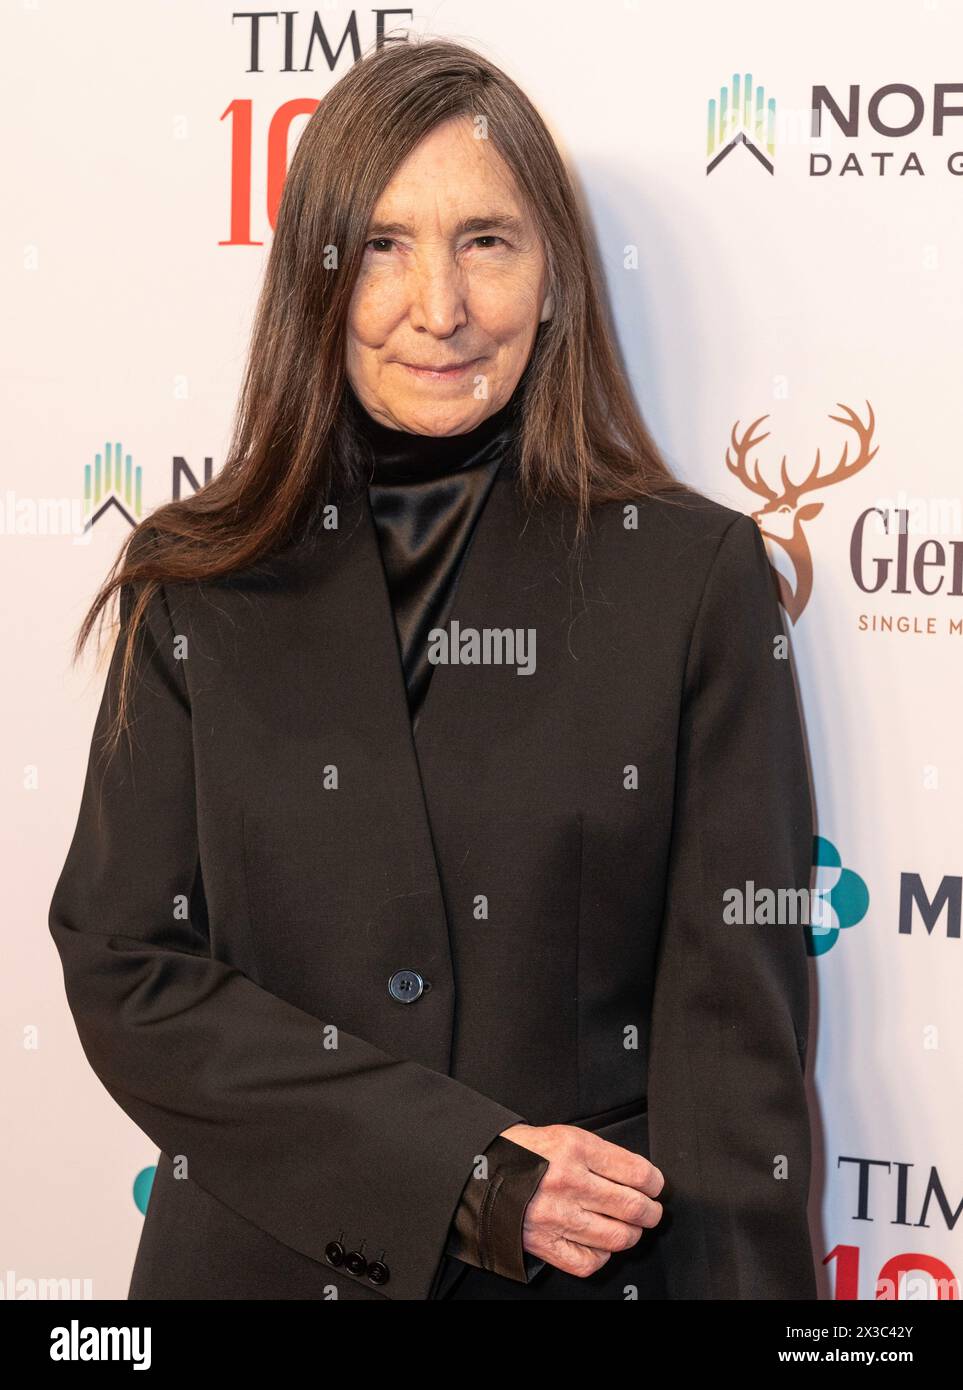 Jenny Holzer nimmt am 25. April 2024 an der Time100-Gala in Jaz im Lincoln Center in New York Teil Stockfoto